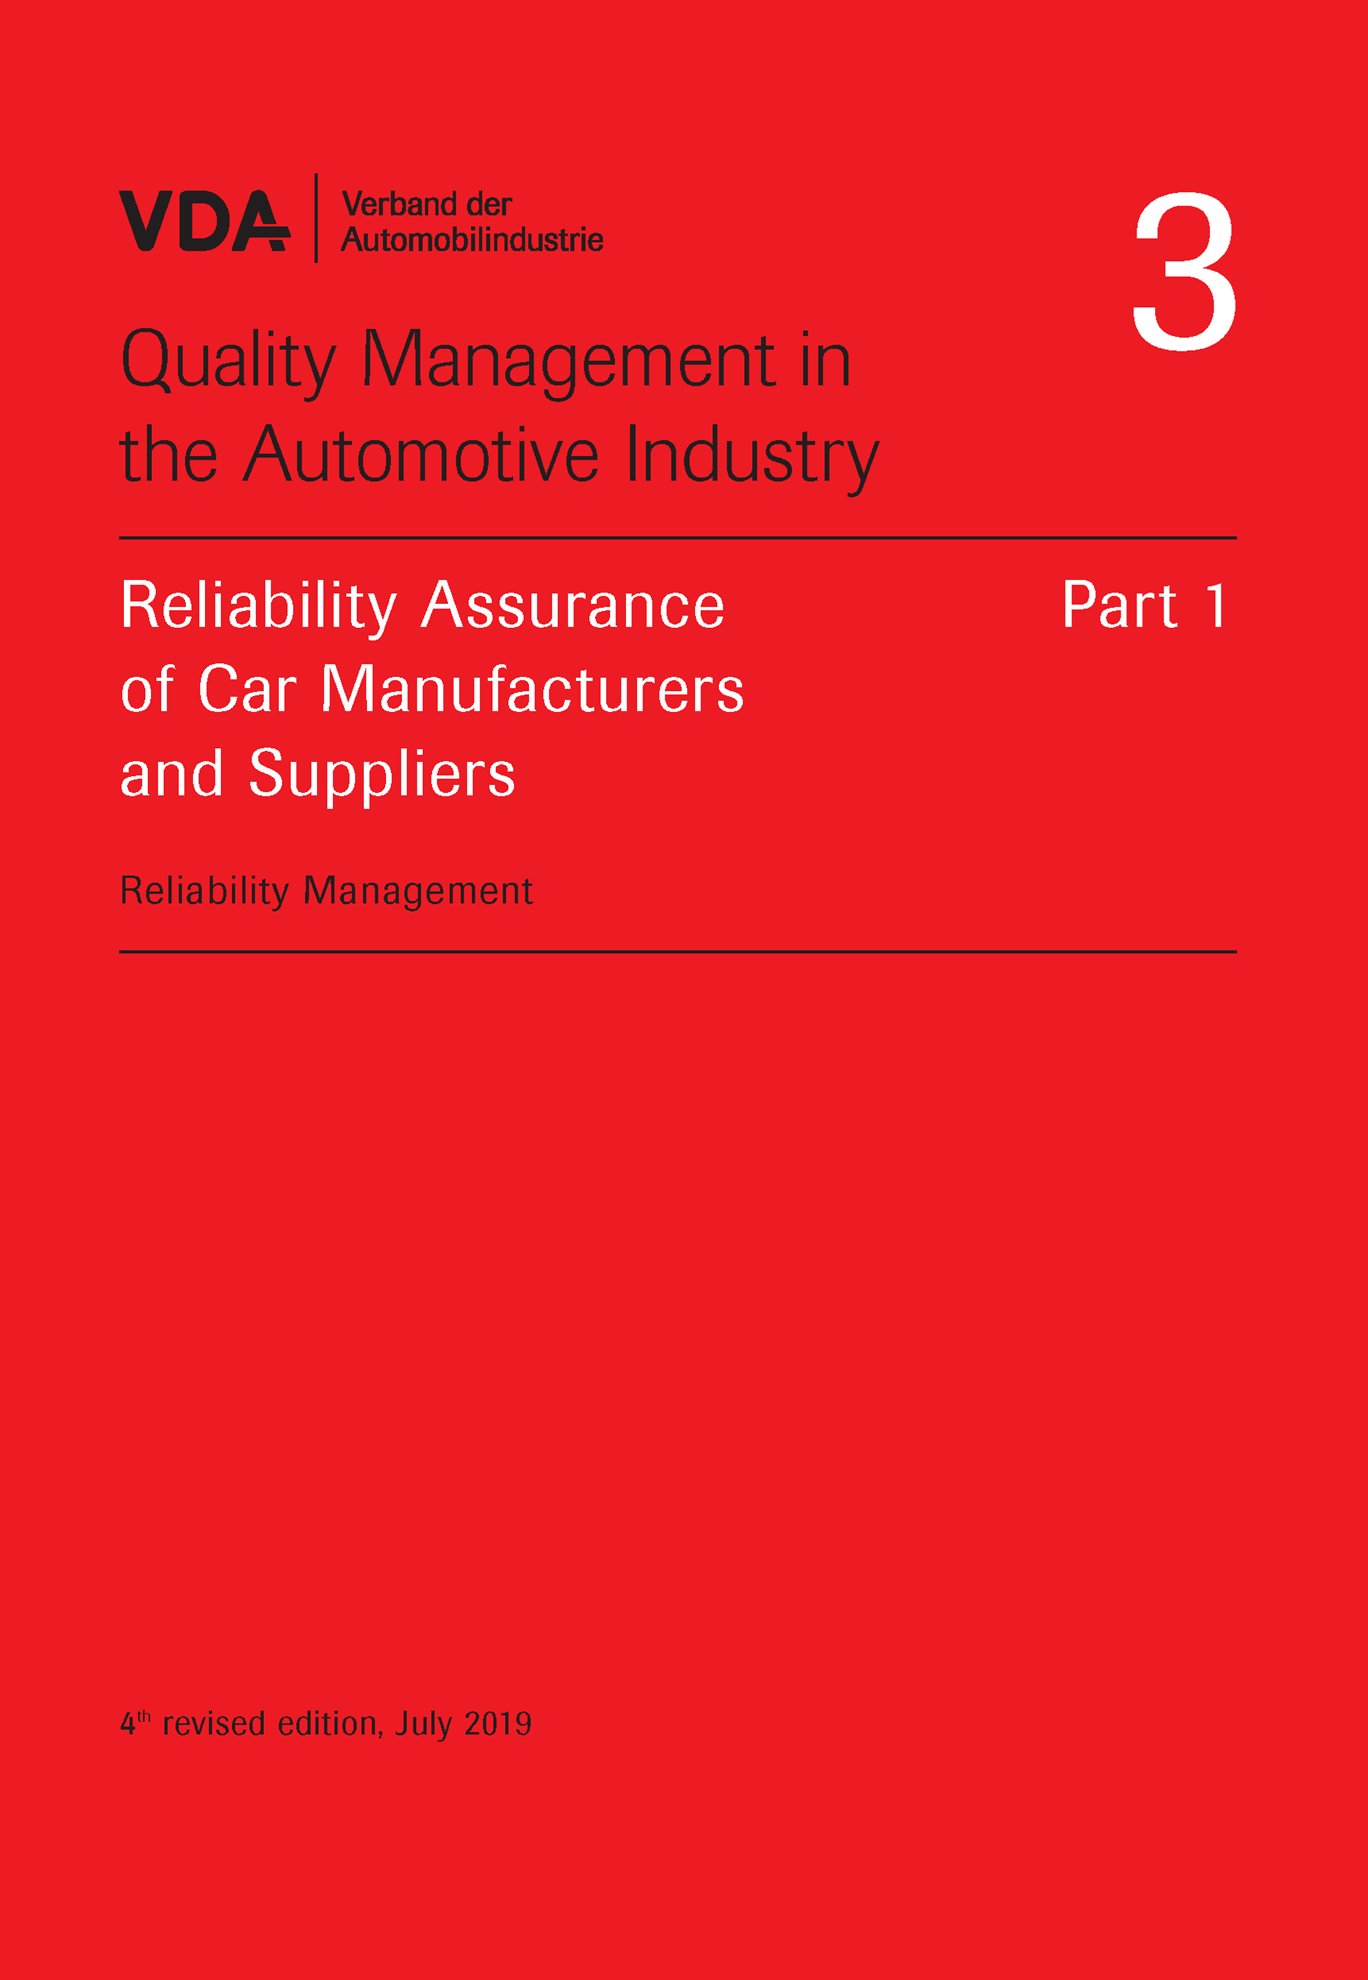 Publikácie  VDA Volume 3 Part 1 Reliability Assurance of Car Manufacturers and Suppliers - Reliability Management, 4th revised edition, July 2019 1.7.2019 náhľad